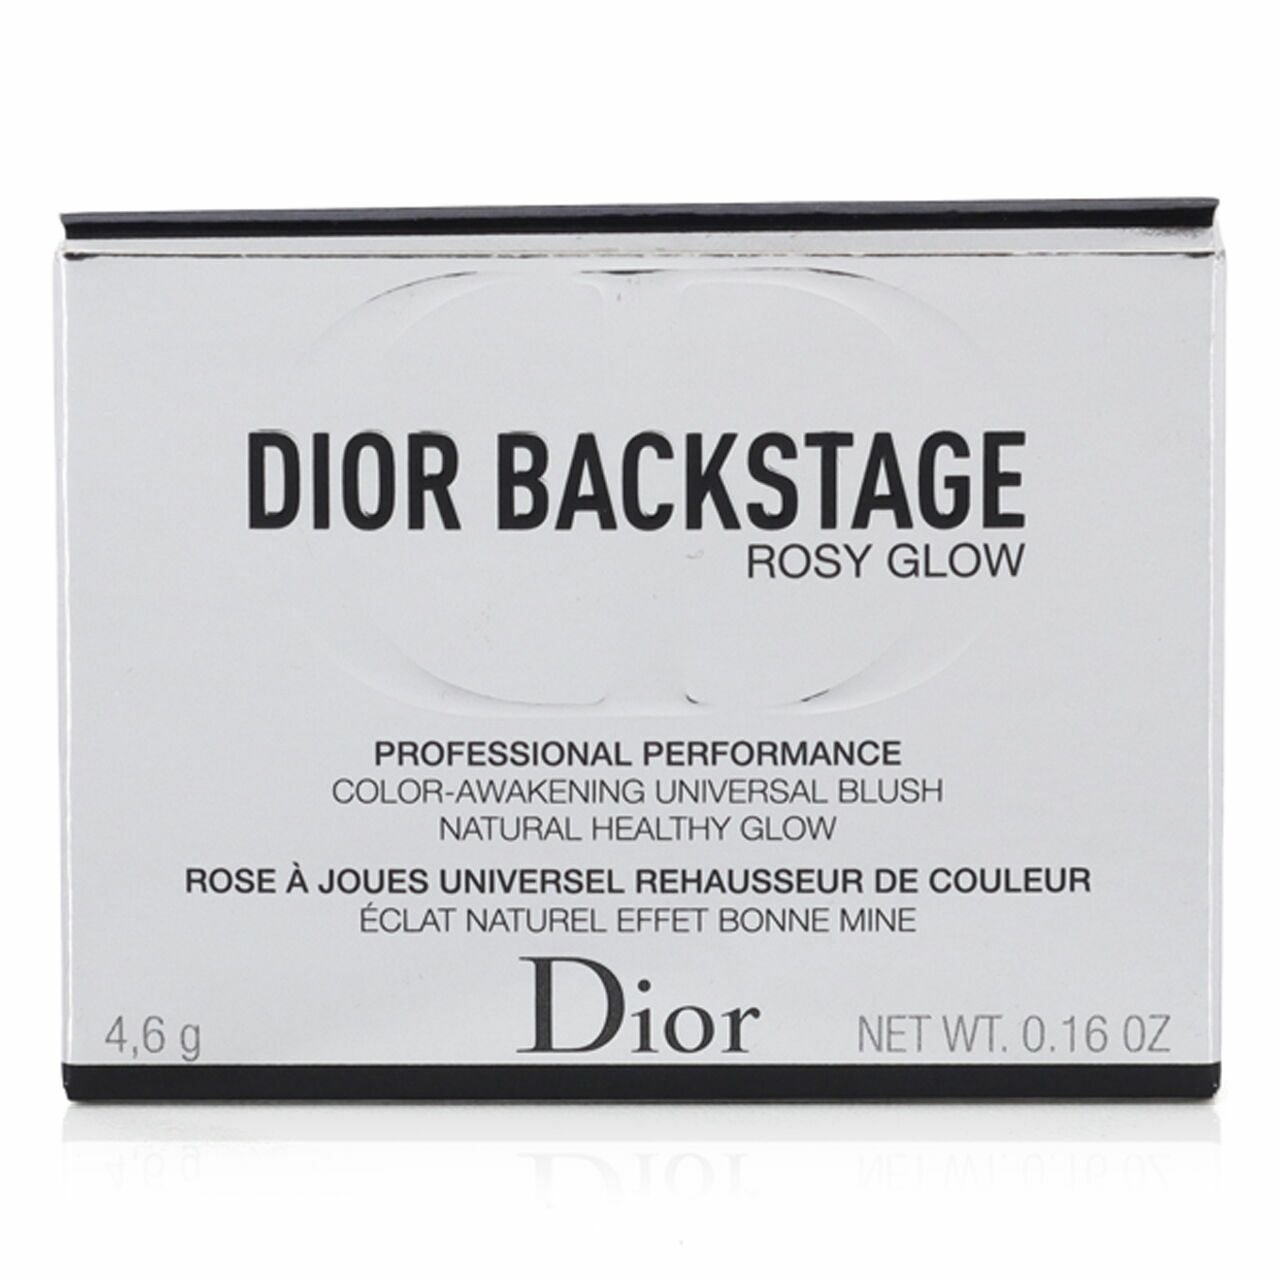 Christian Dior Backstage Rosy Glow Blush - 004 Coral Faces